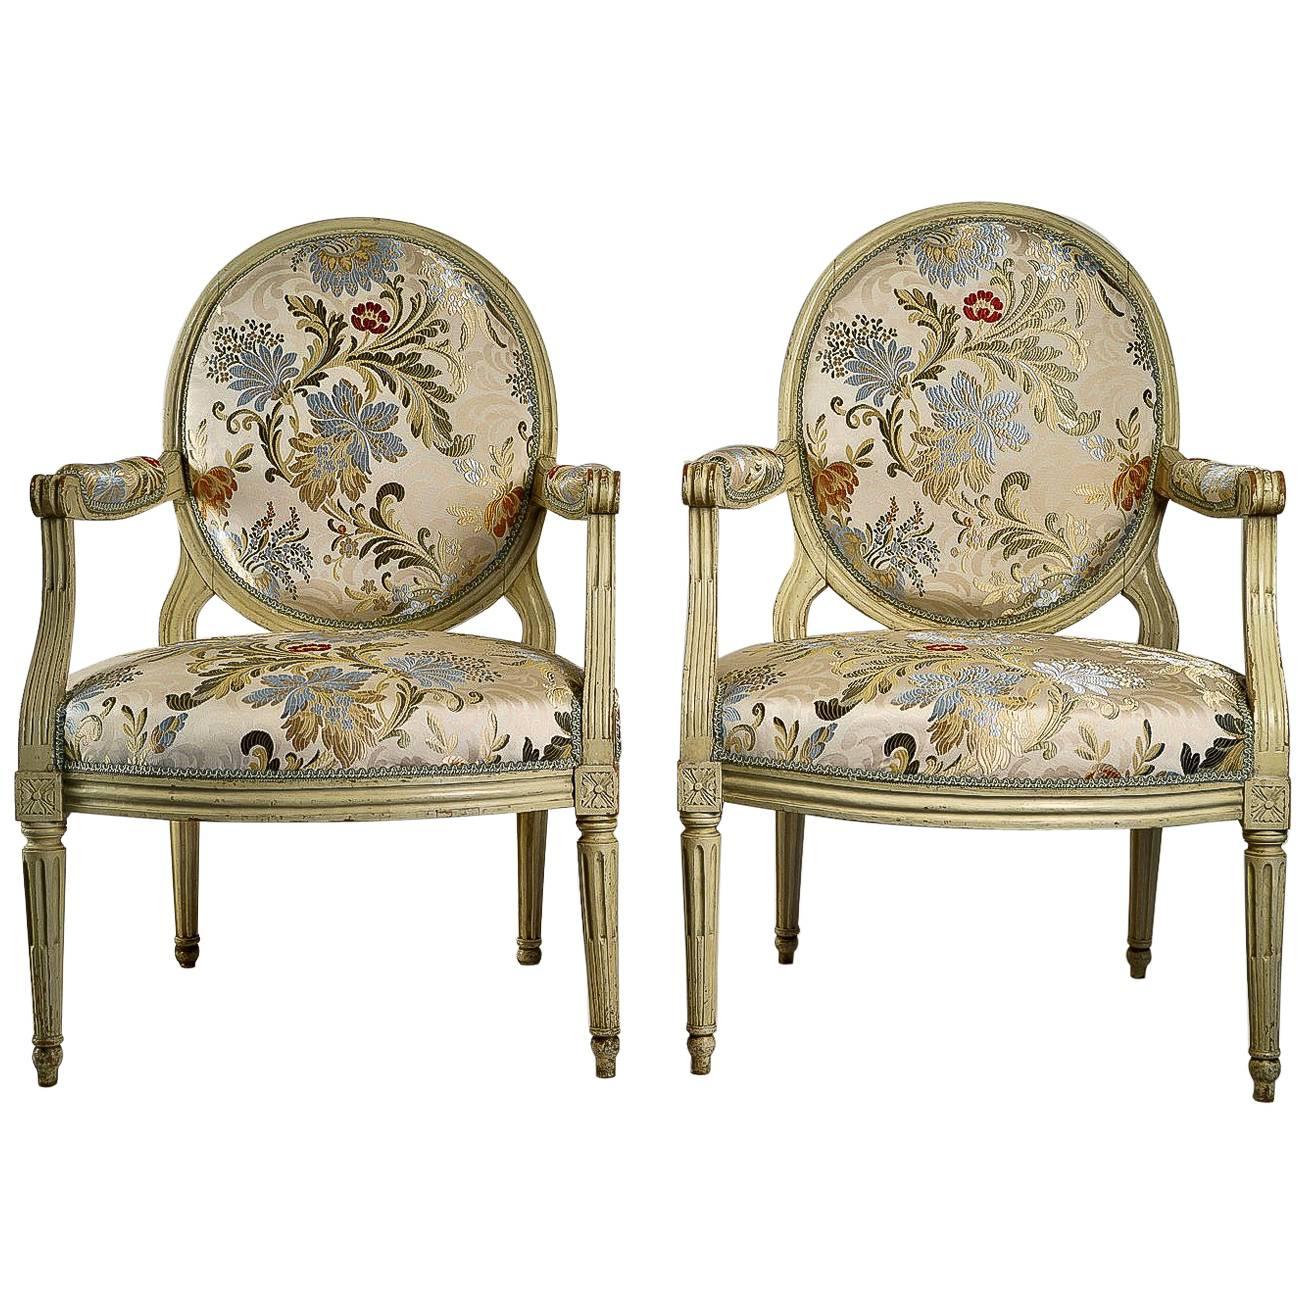 French 18th-Century, Lacquered Wood Pair of Large Armchairs Louis XVI Period For Sale